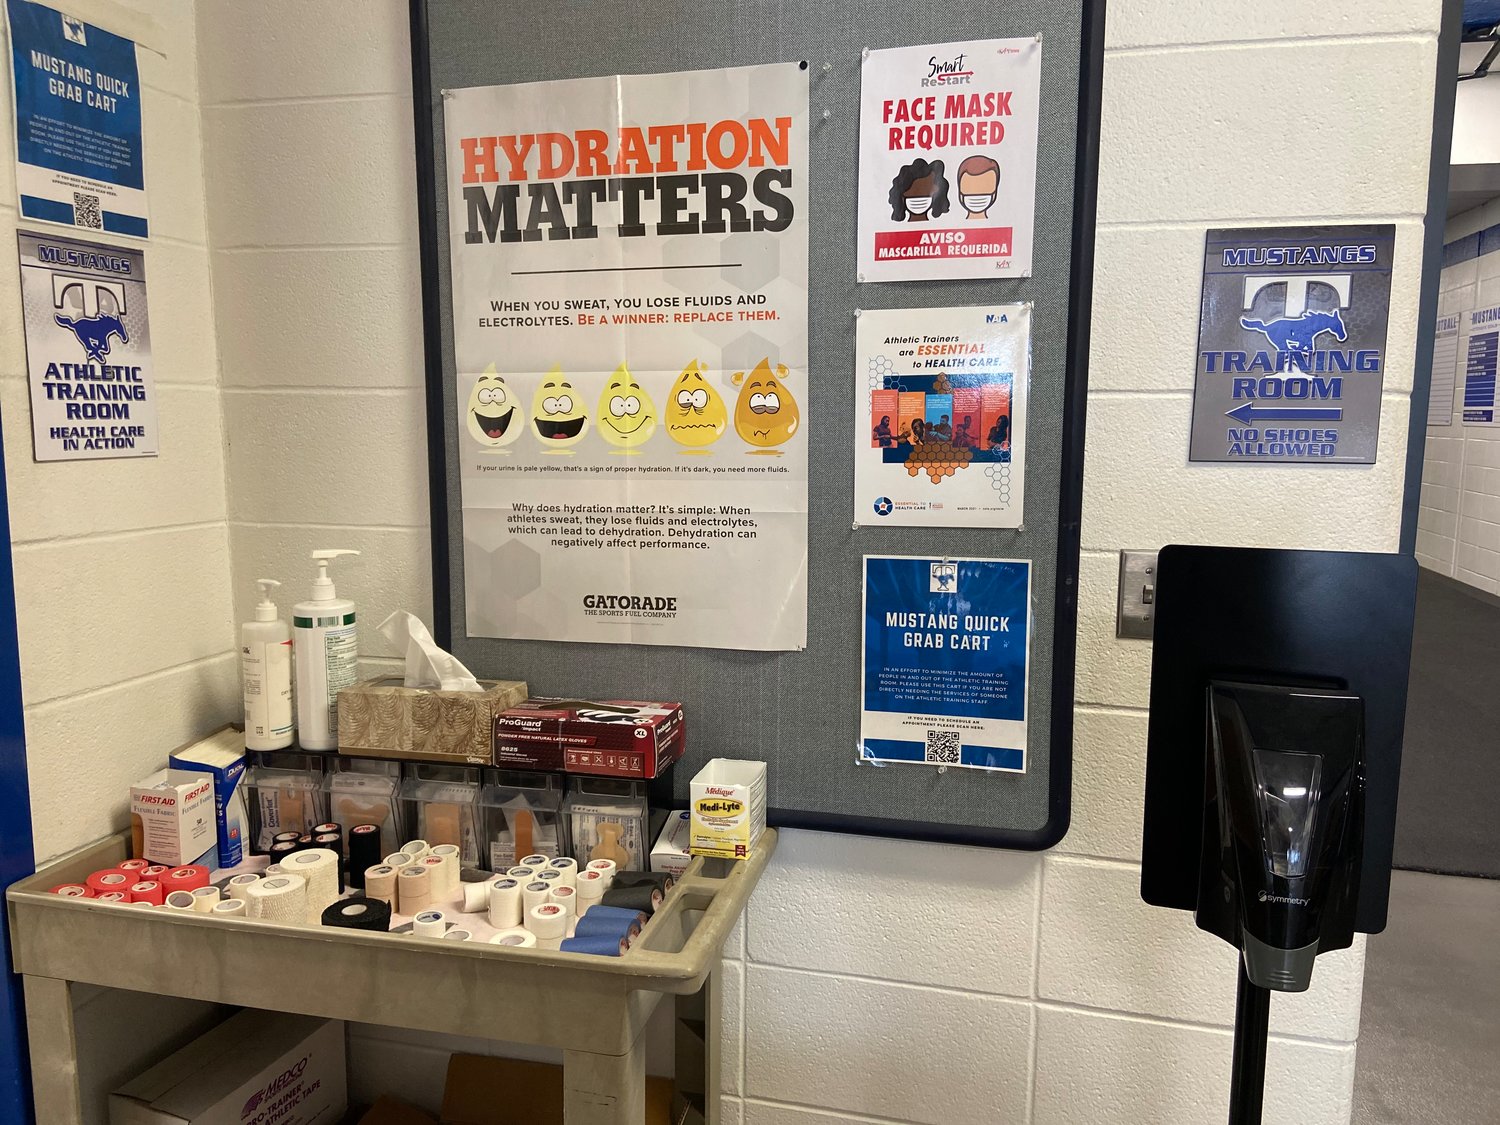 Pictured is the Mustang “Quick Grab” cart with essentials located outside of the athletic training room in order to limit foot traffic inside it.